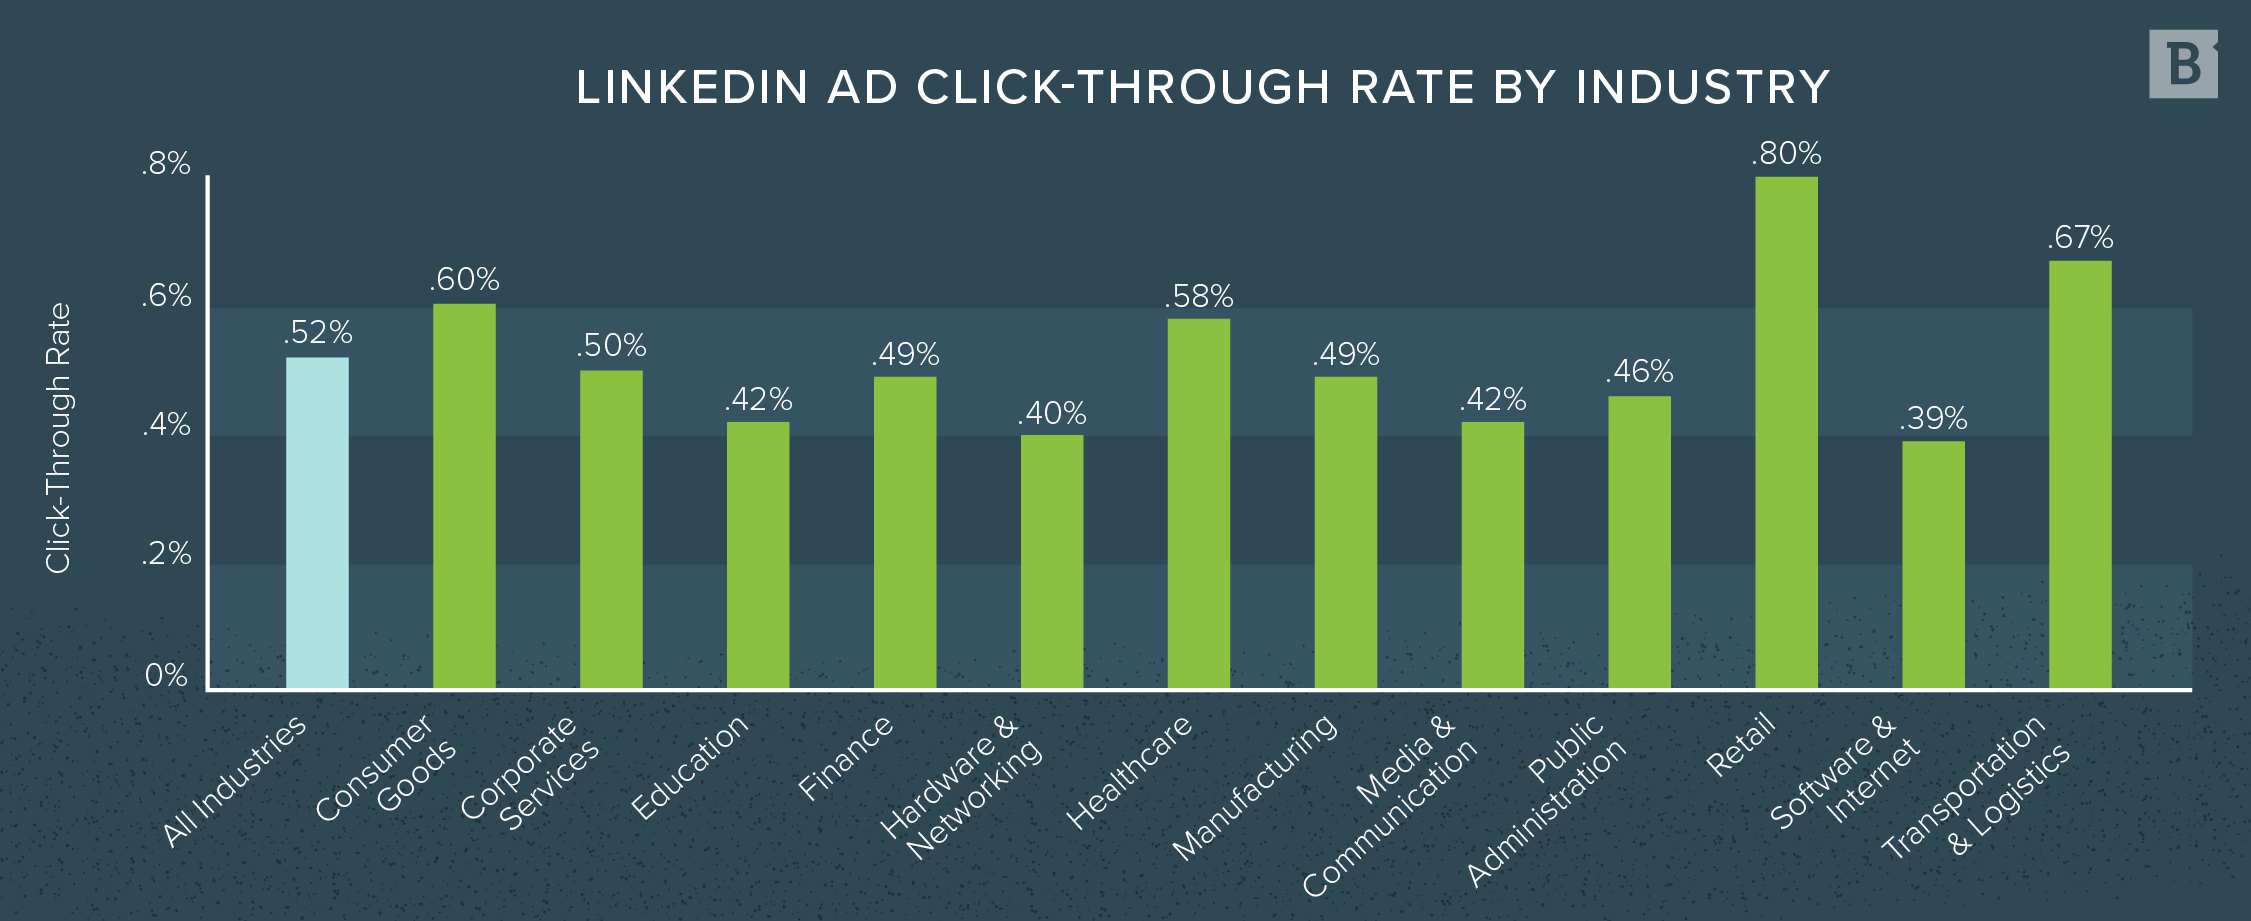 LinkedIn ad click through rate by industry